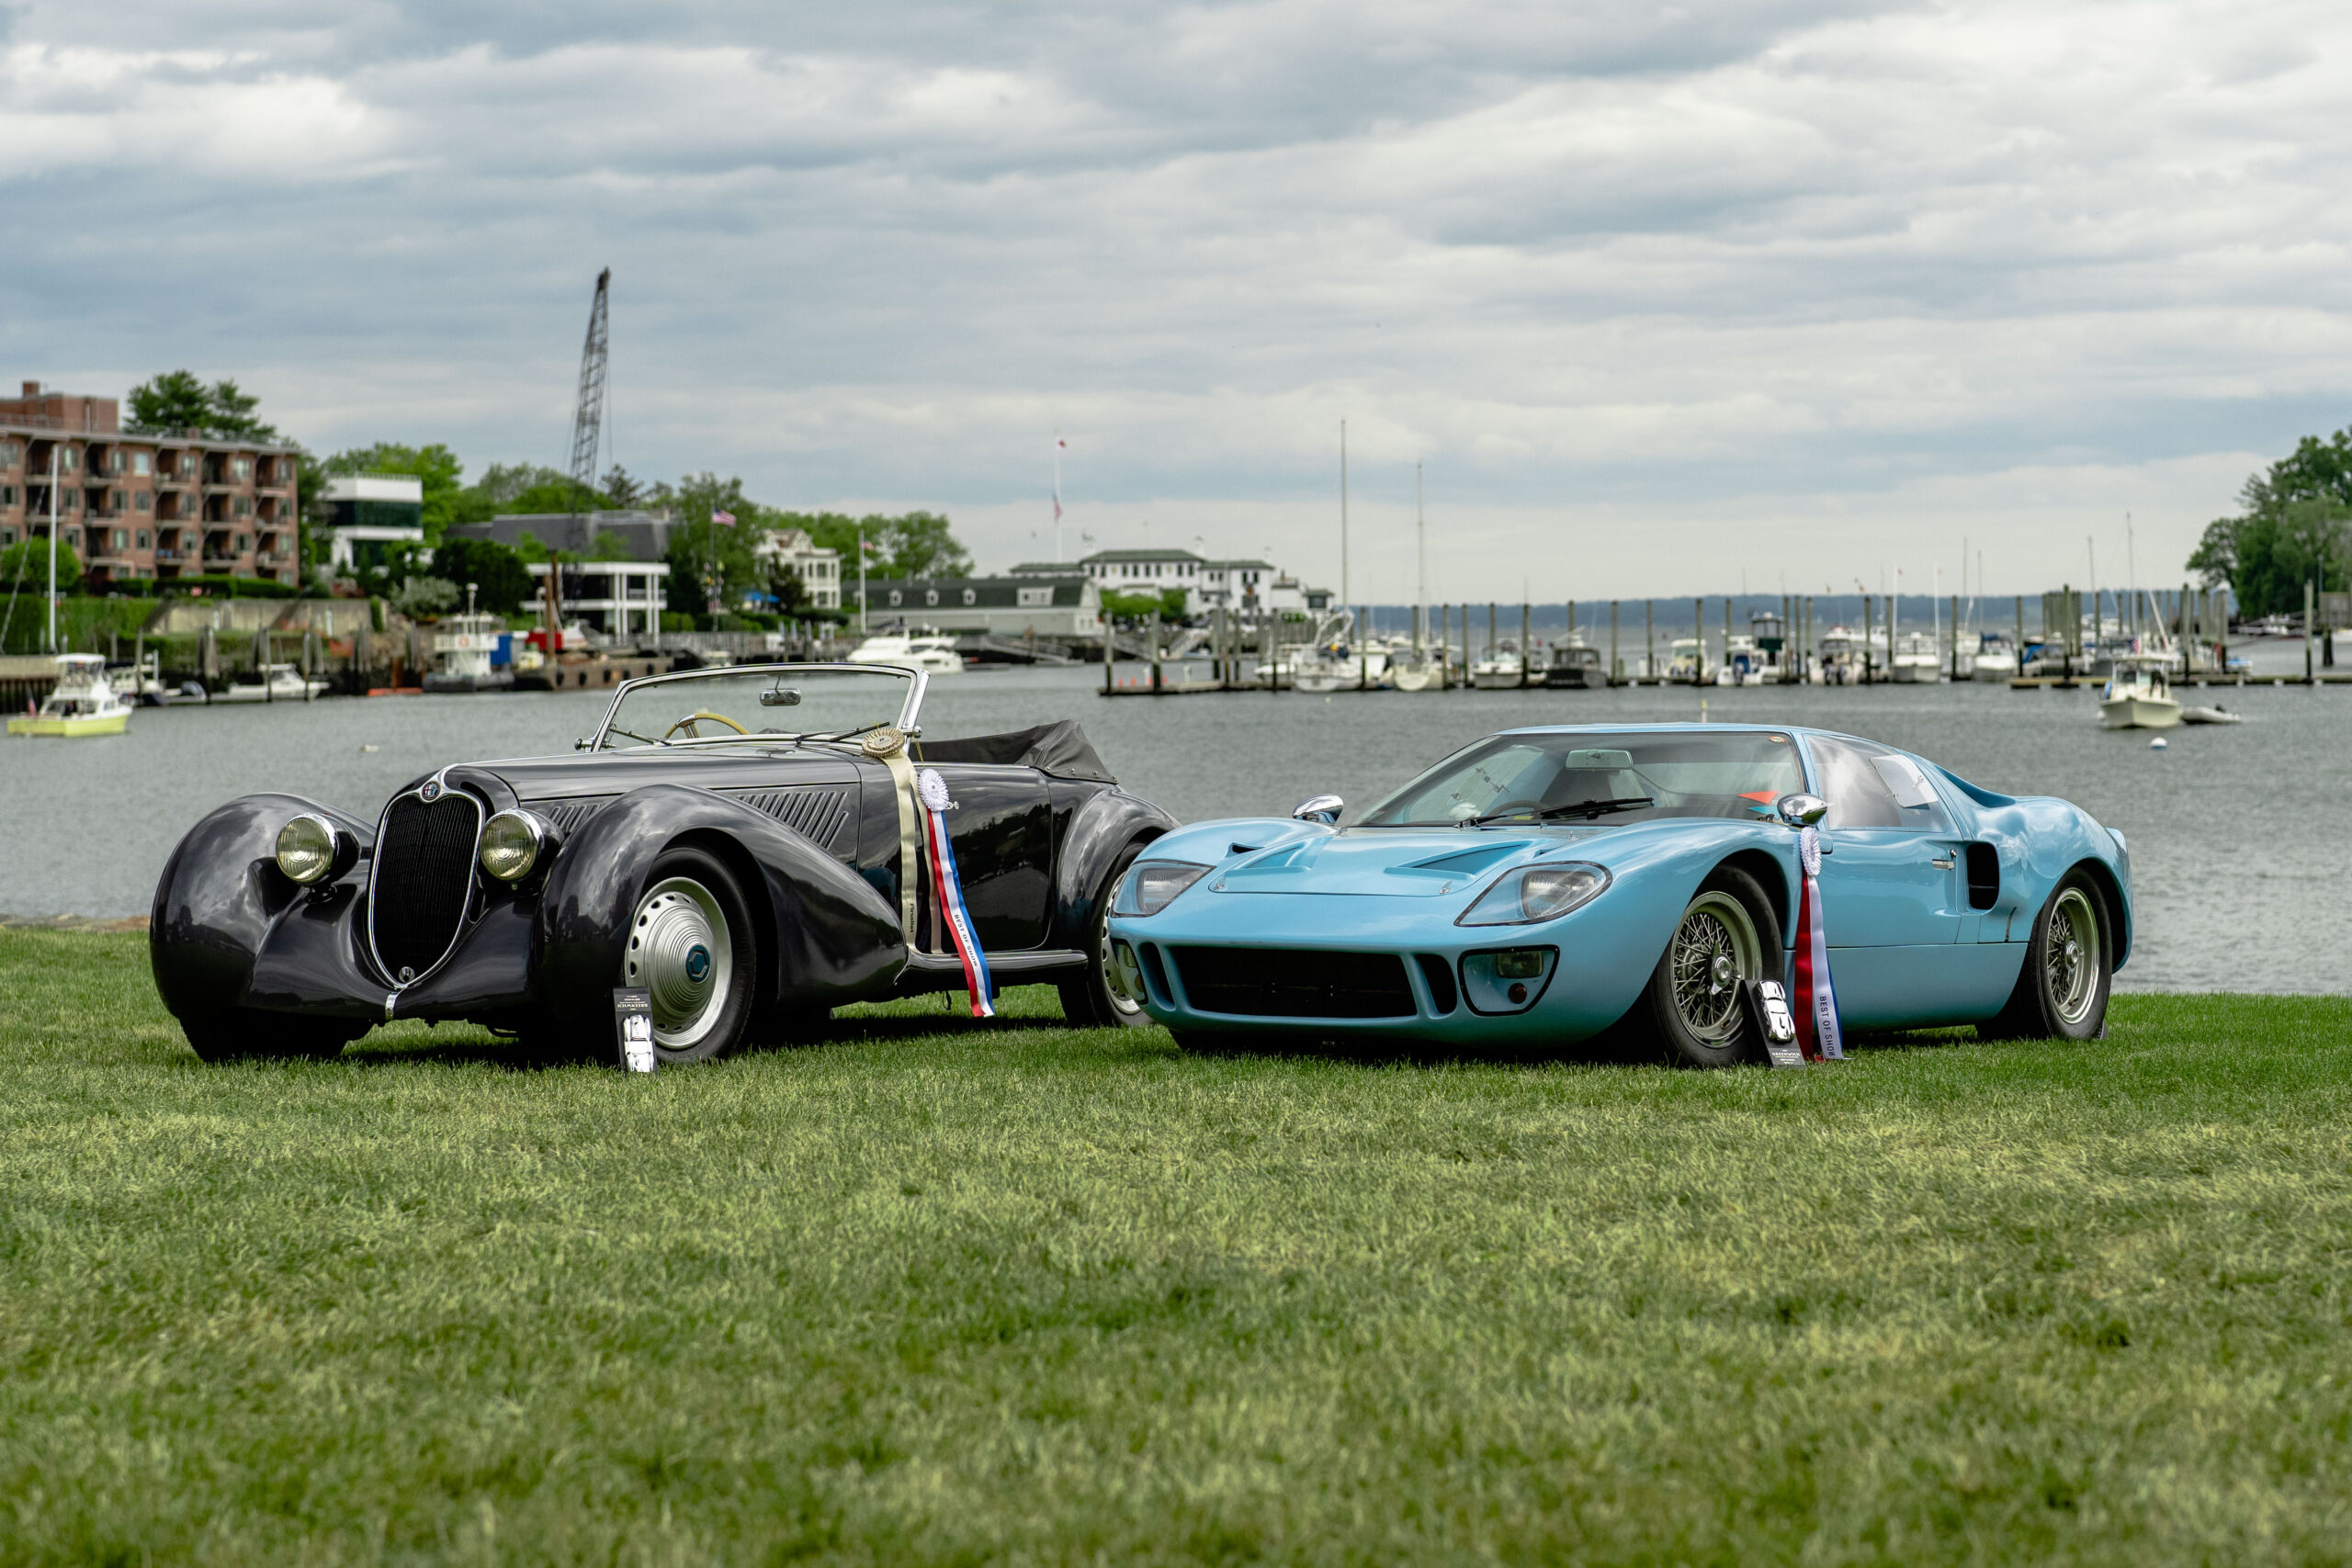 Thank you for joining us for the 2023 Greenwich Concours d'Elegance